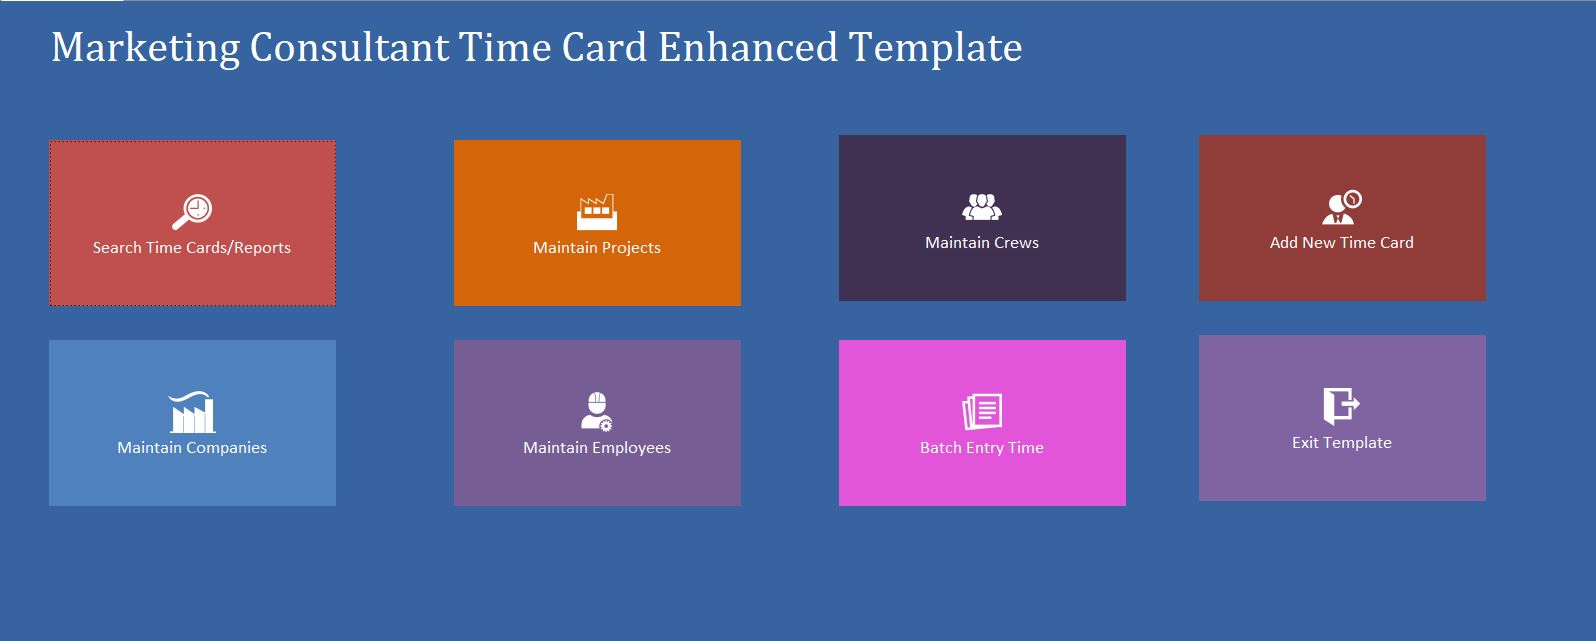 Enhanced Marketing Consultant Time Card Template | Time Card Database